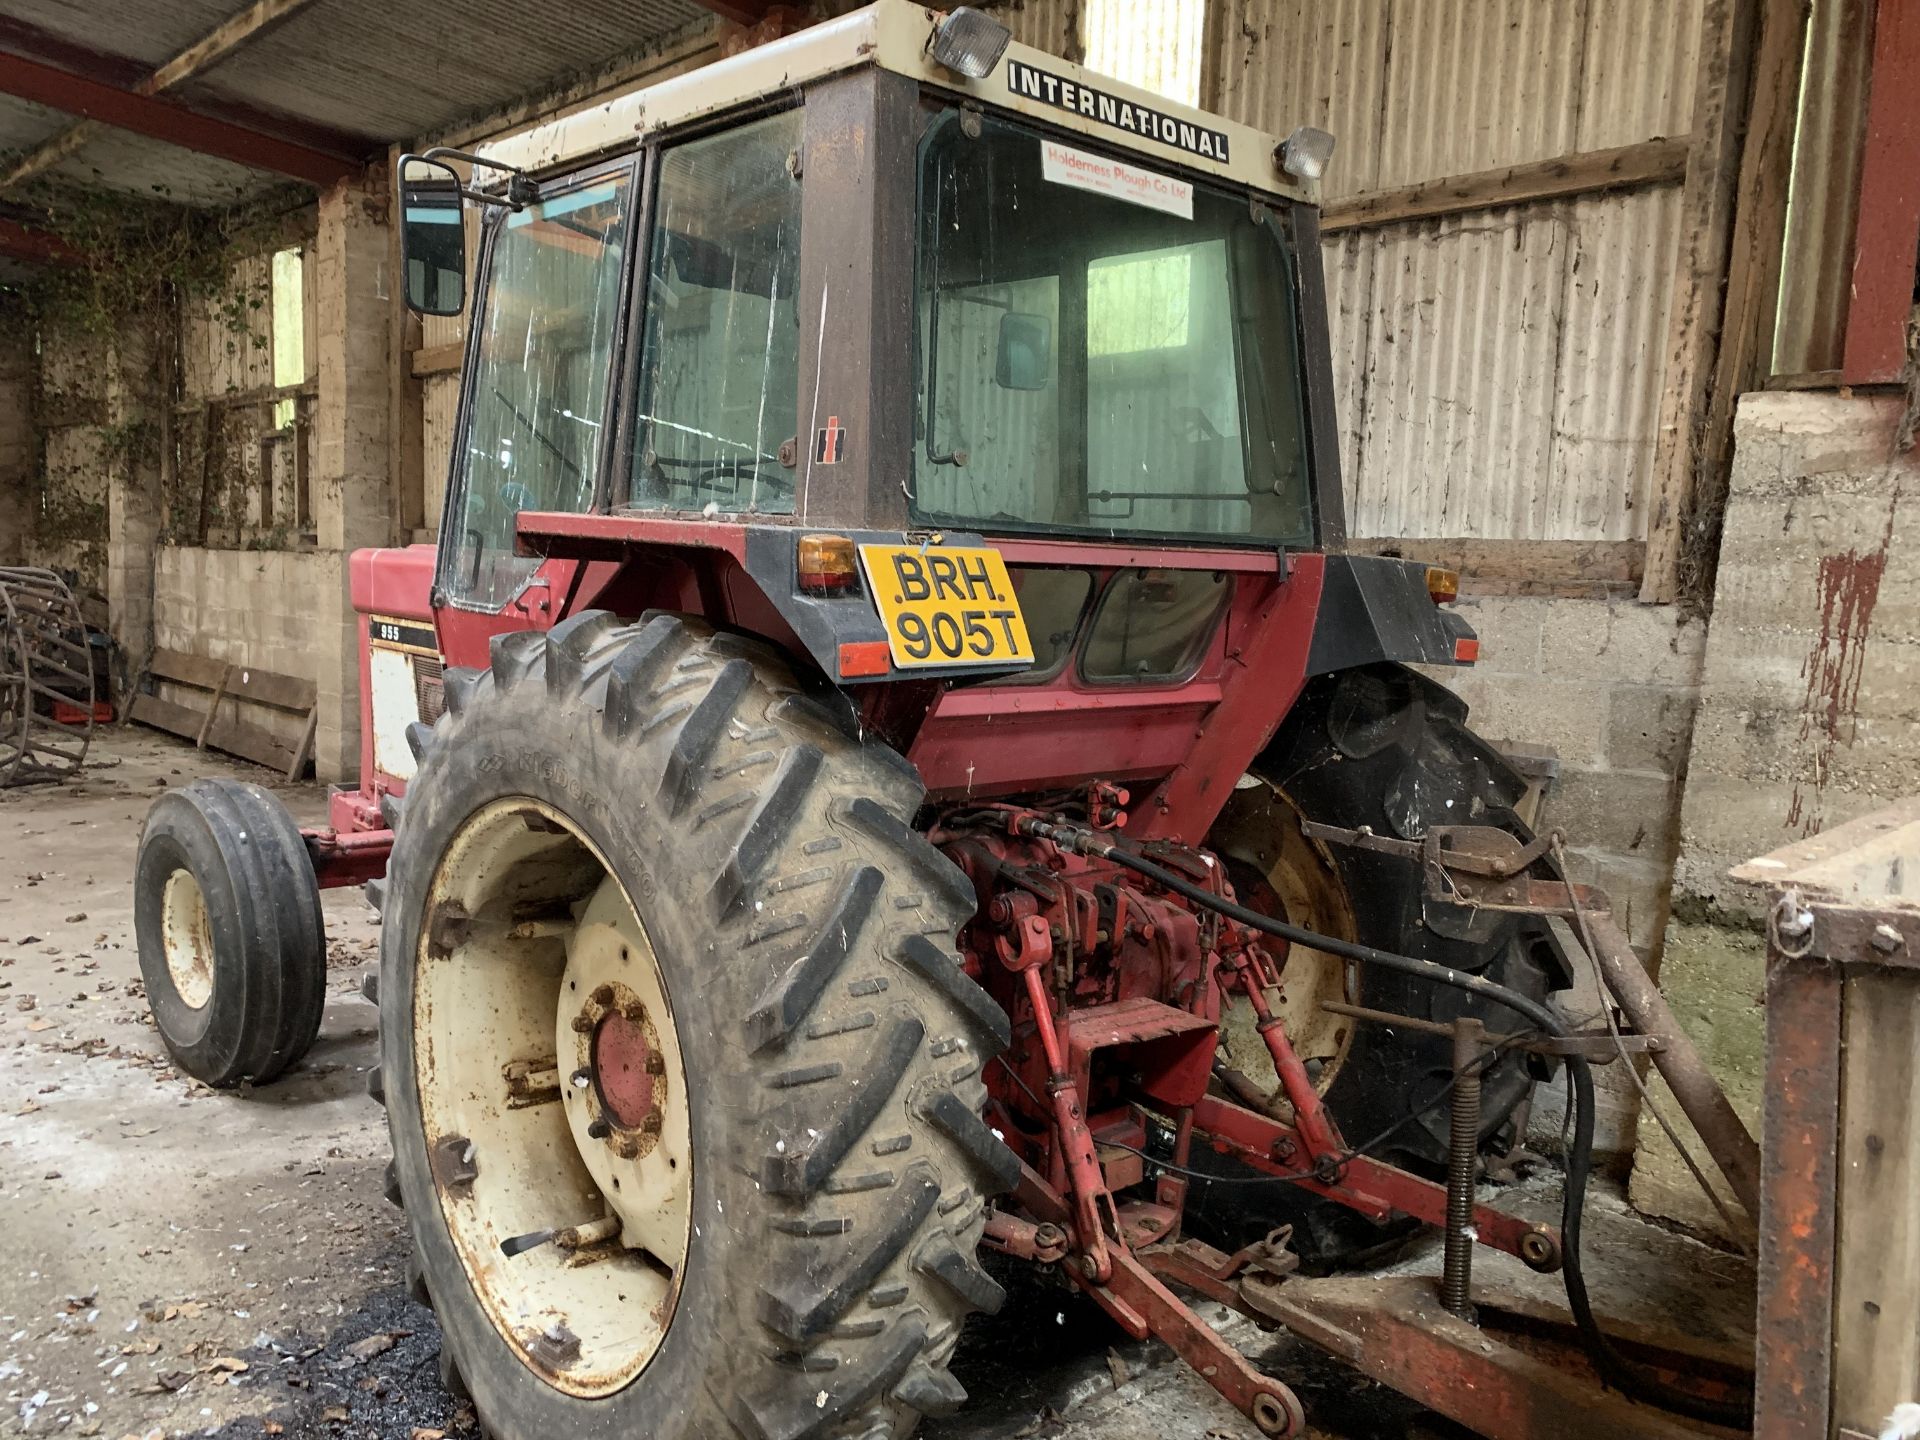 1978 International 955 tractor, BRH 905T, 7248 hours - Image 8 of 8